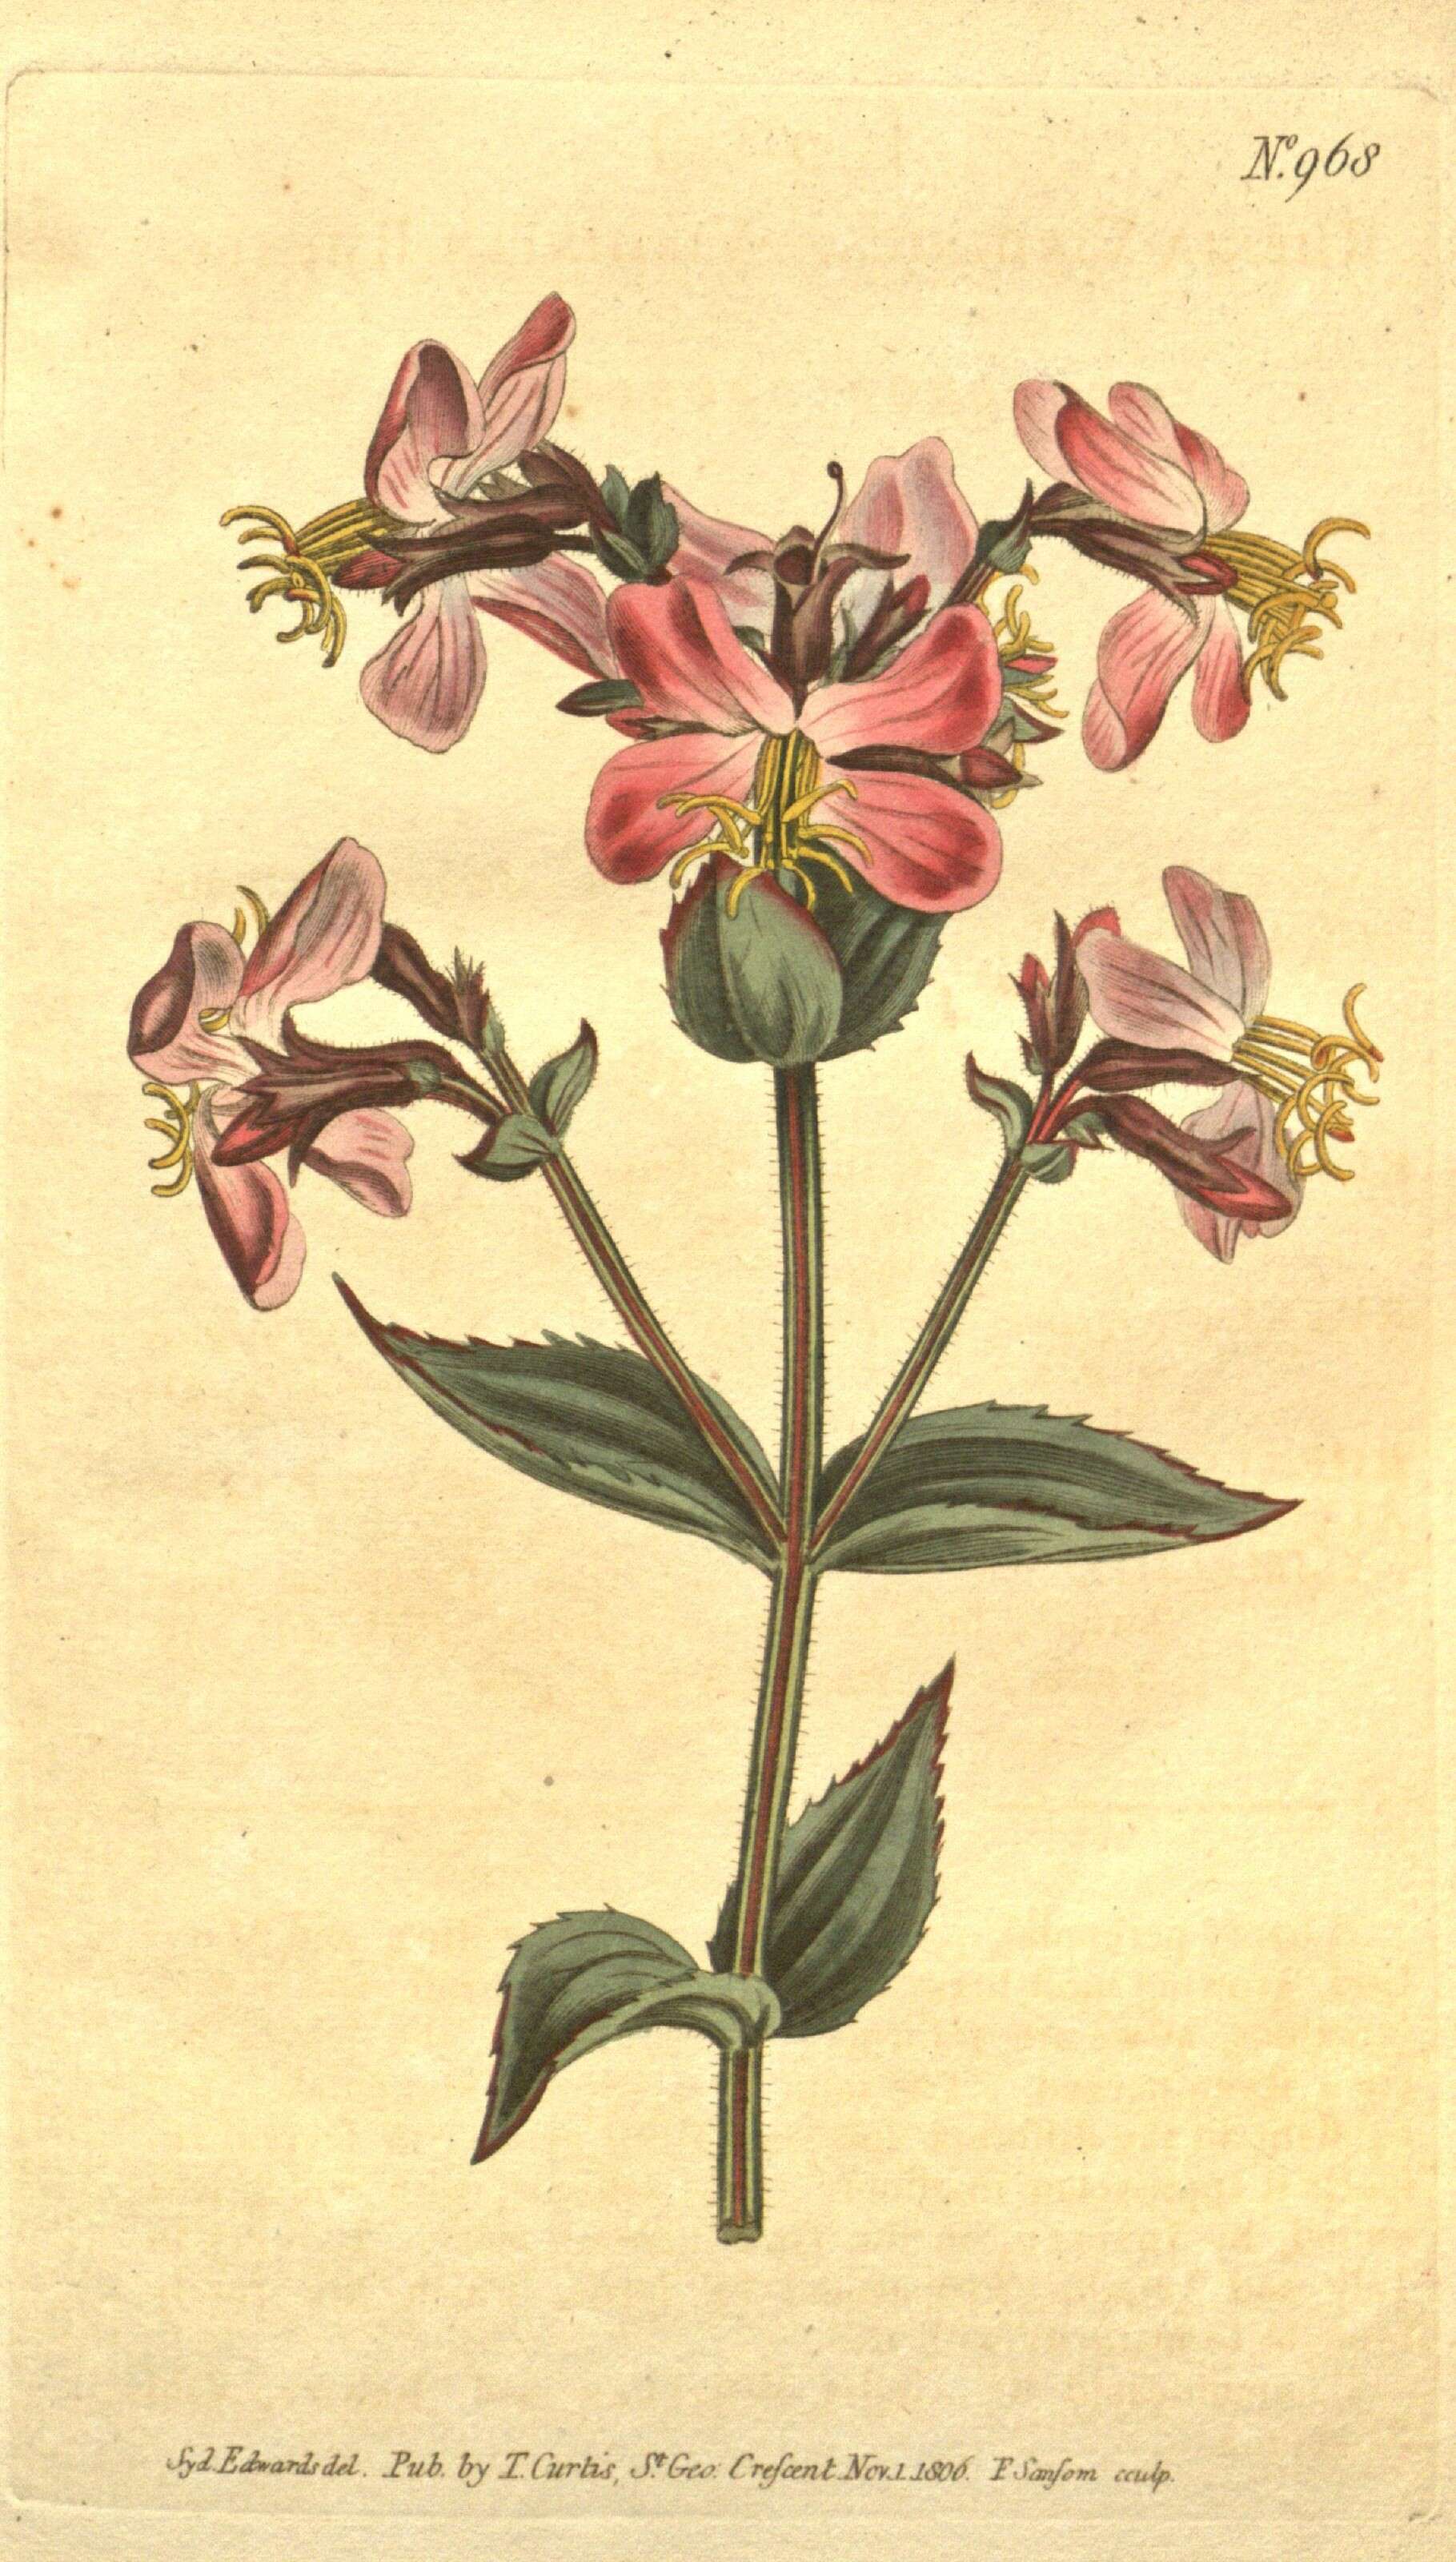 Image of meadowbeauty